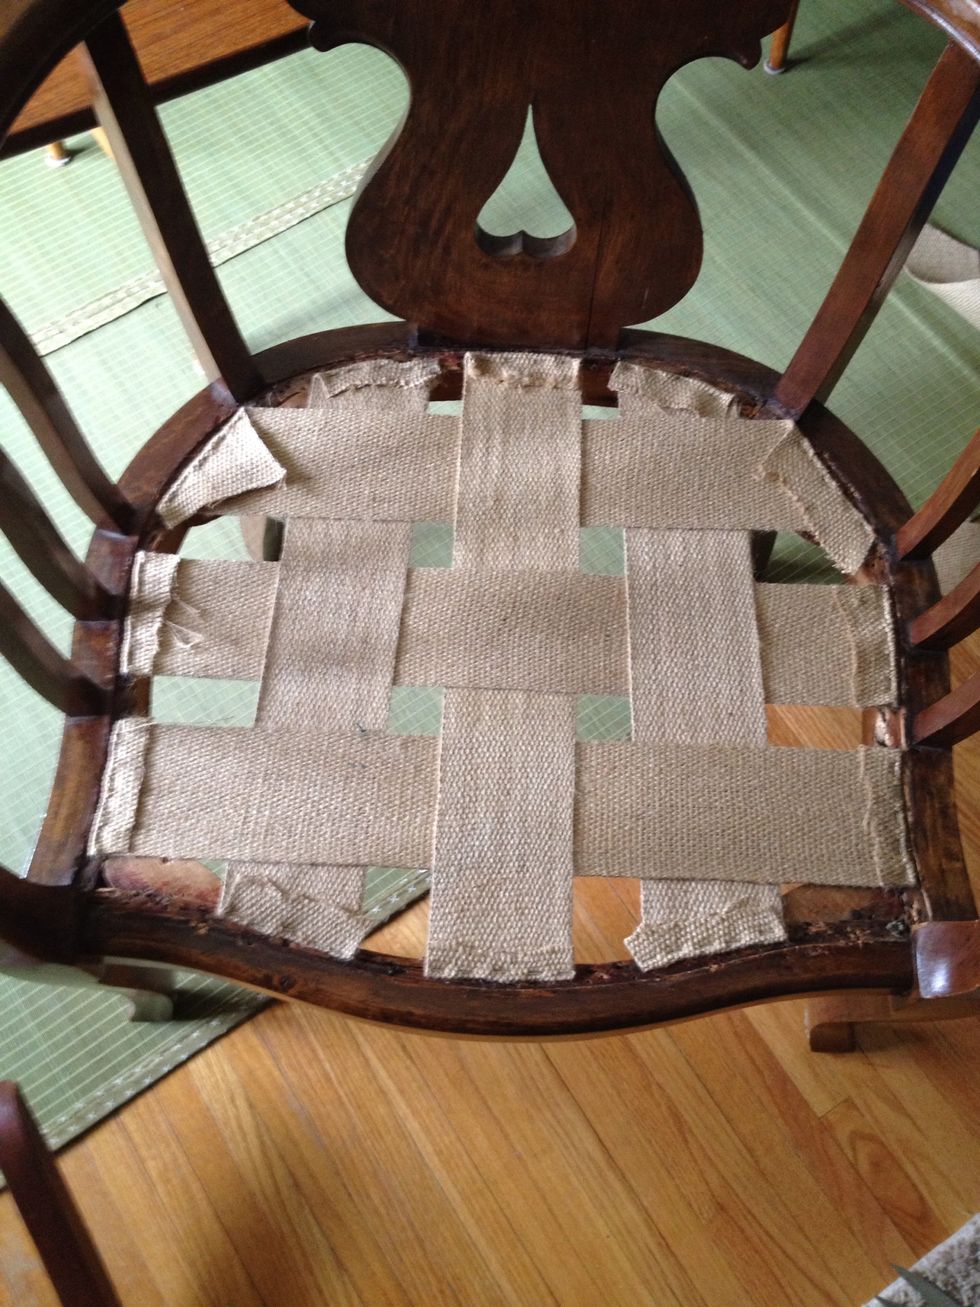 How to upholster a chair without springs - B+C Guides